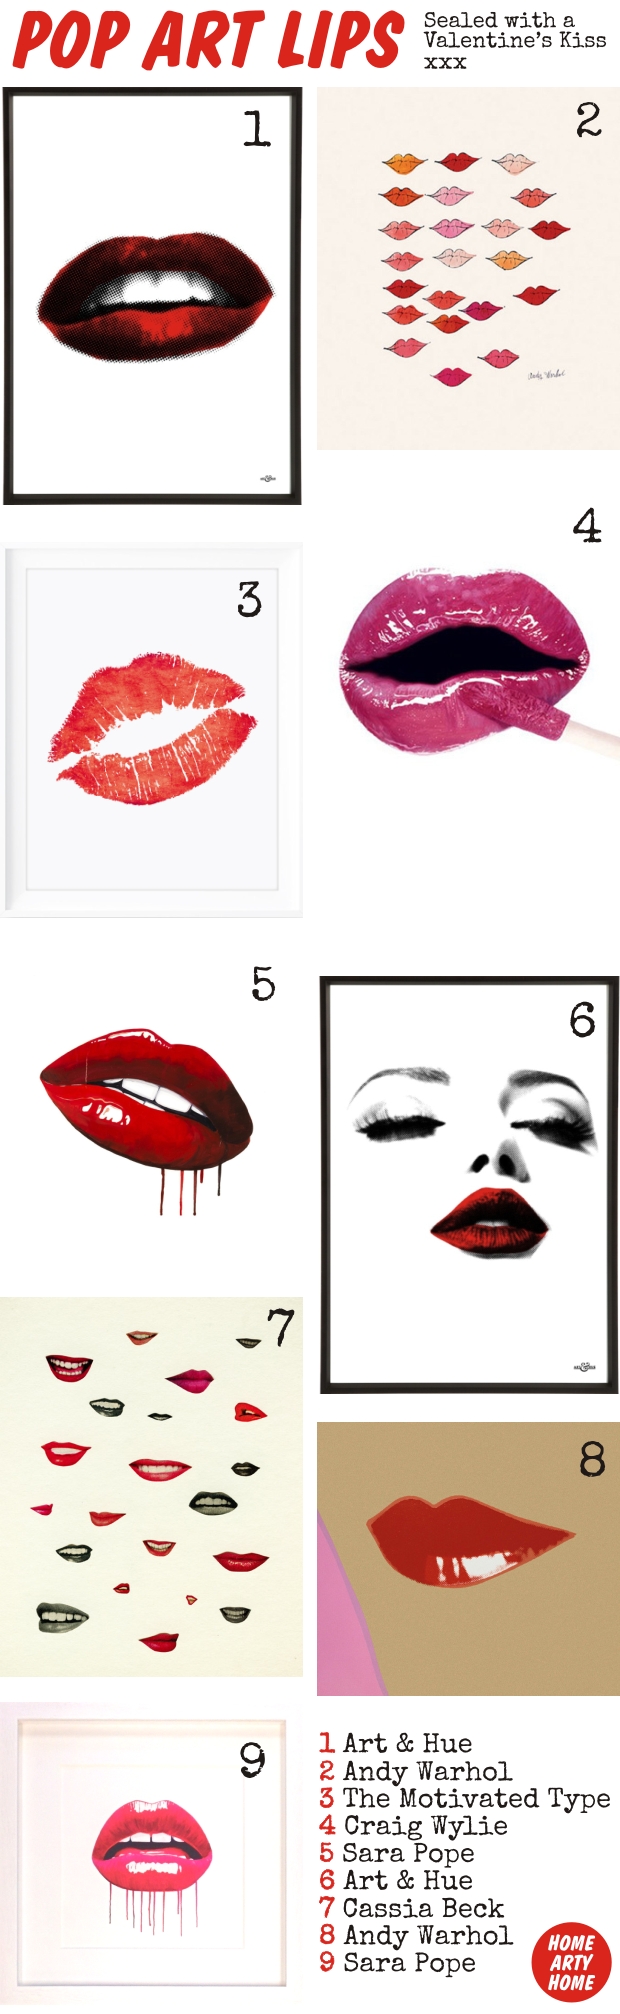 Pop Art Lips Sealed with a Valentines Kiss homeartyhome